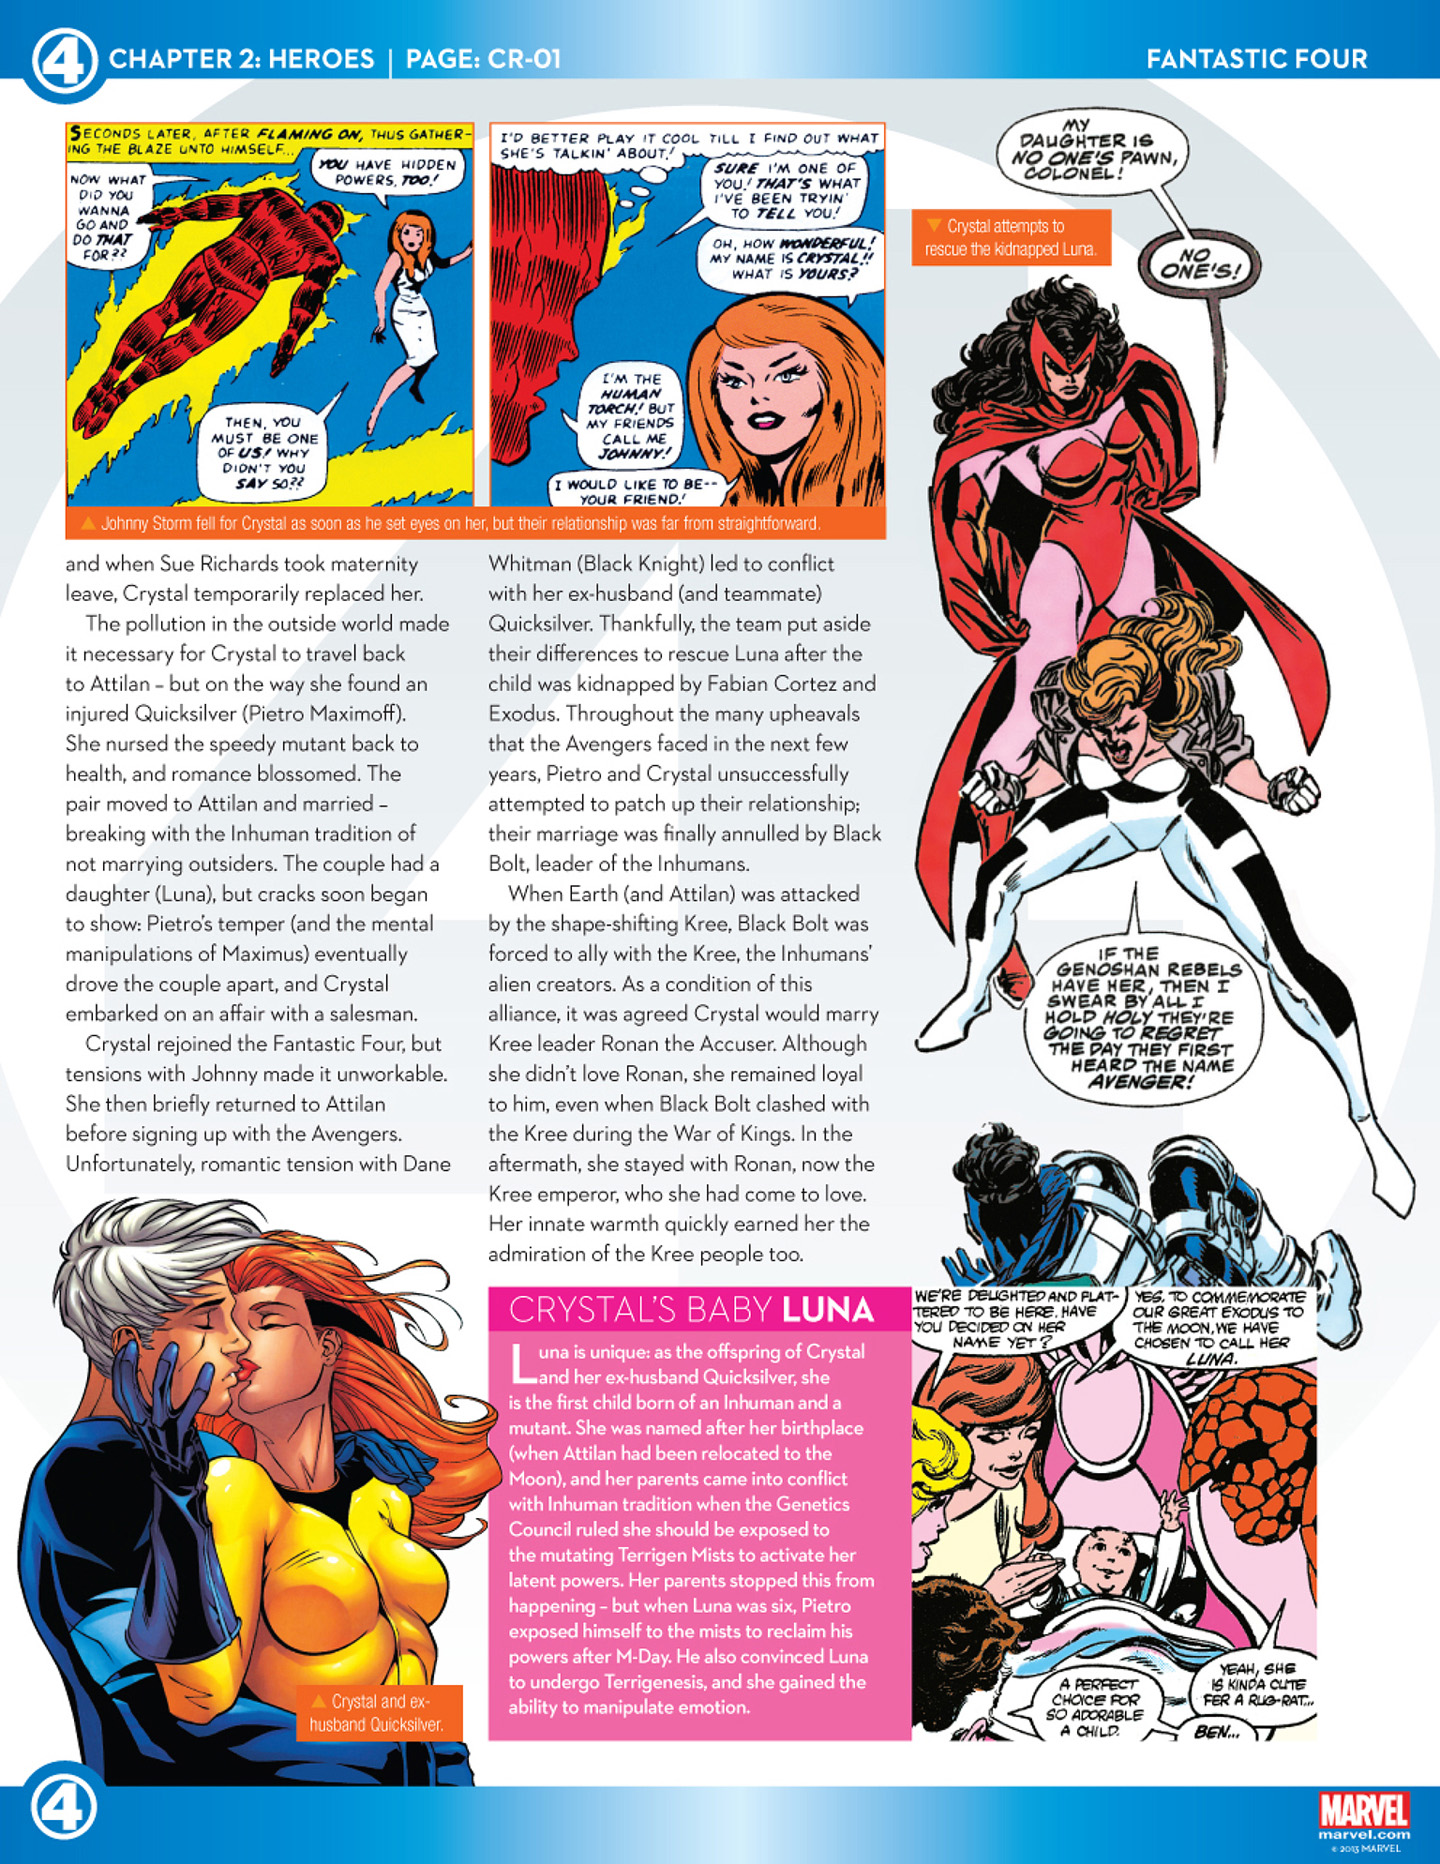 Read online Marvel Fact Files comic -  Issue #40 - 17